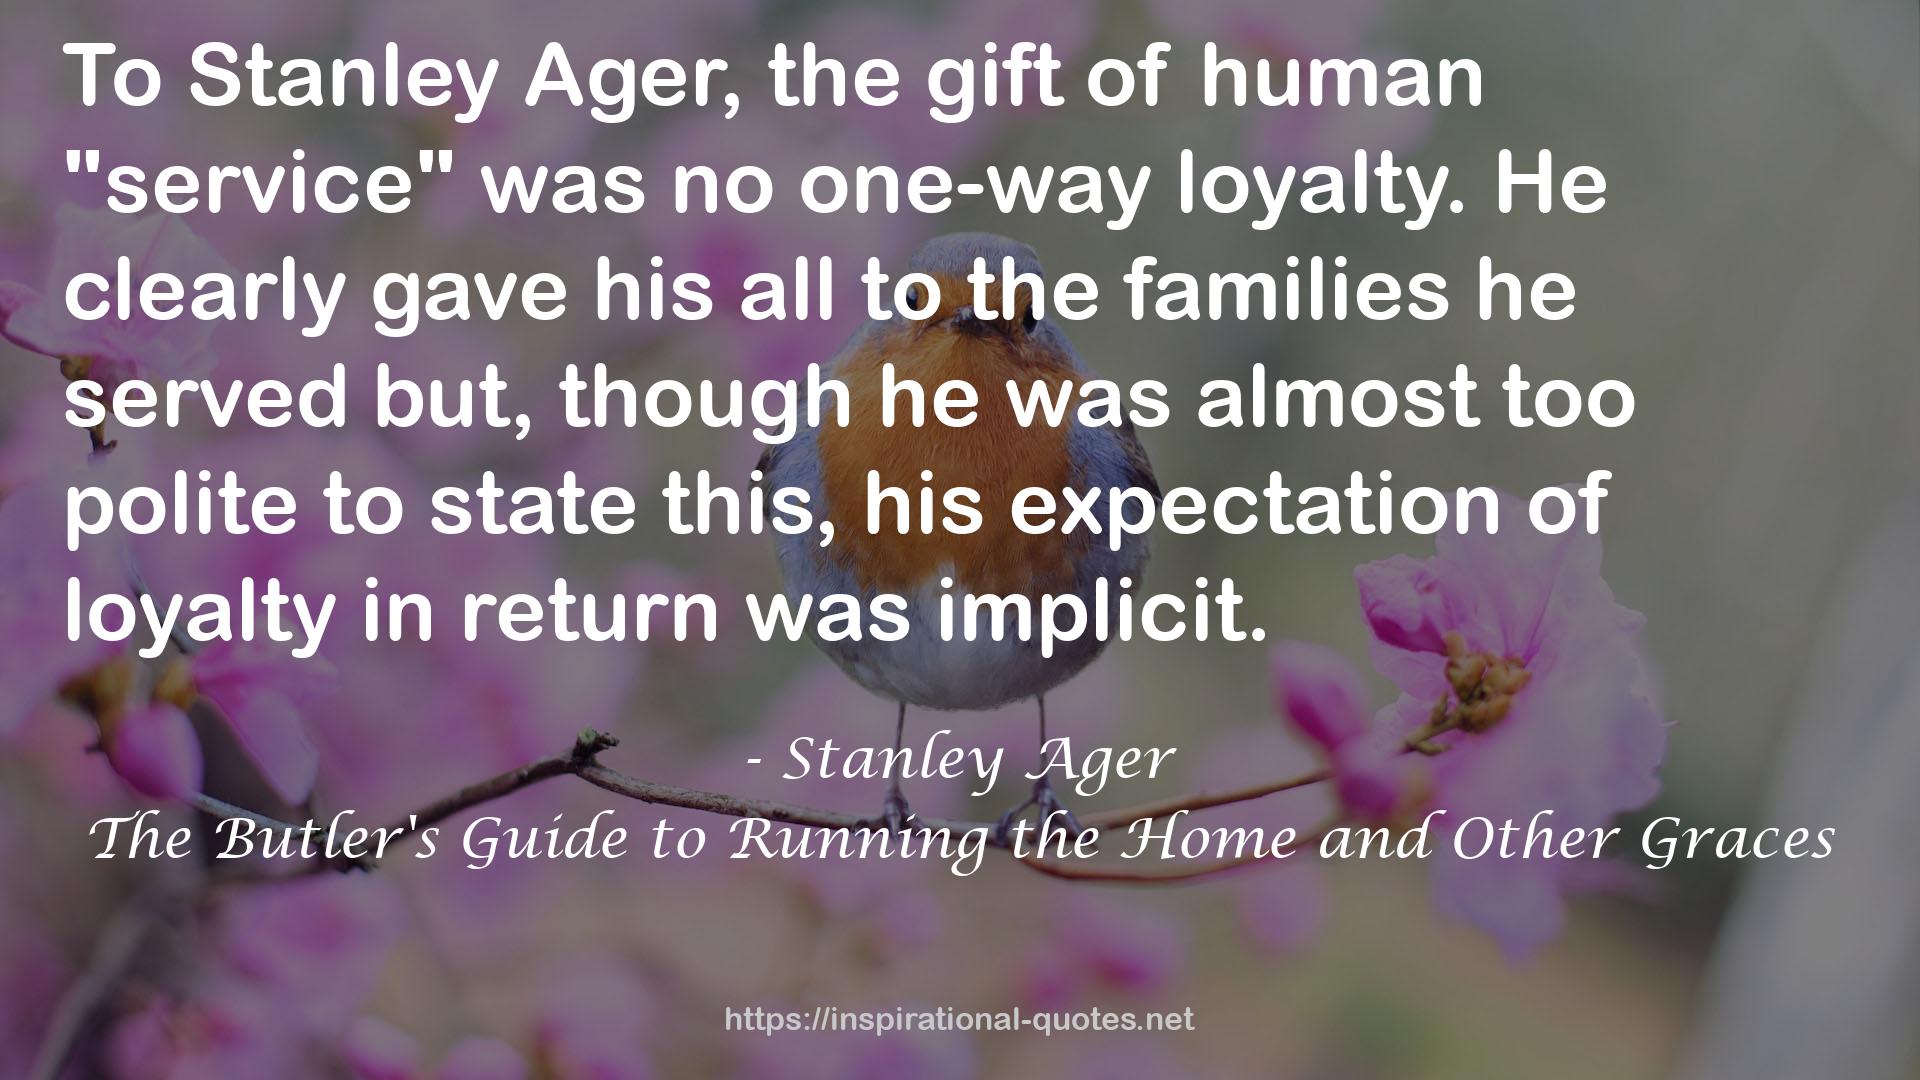 Stanley Ager QUOTES